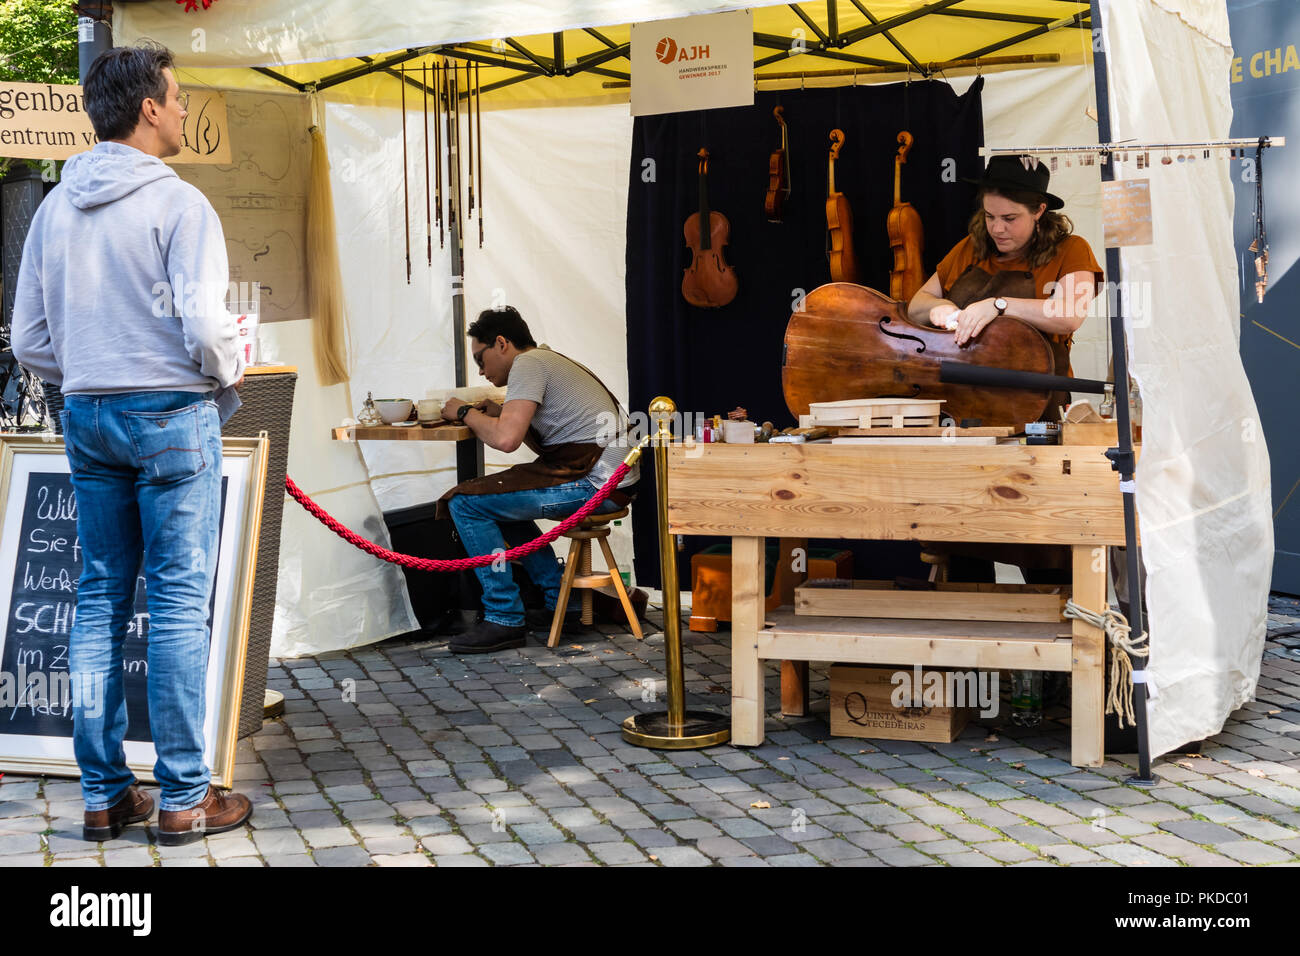 people browsing the craft market in Aachen - in 2018 the annual market took place on 1st and 2nd of September 2018 - Aachen, Germany, Europe Stock Photo